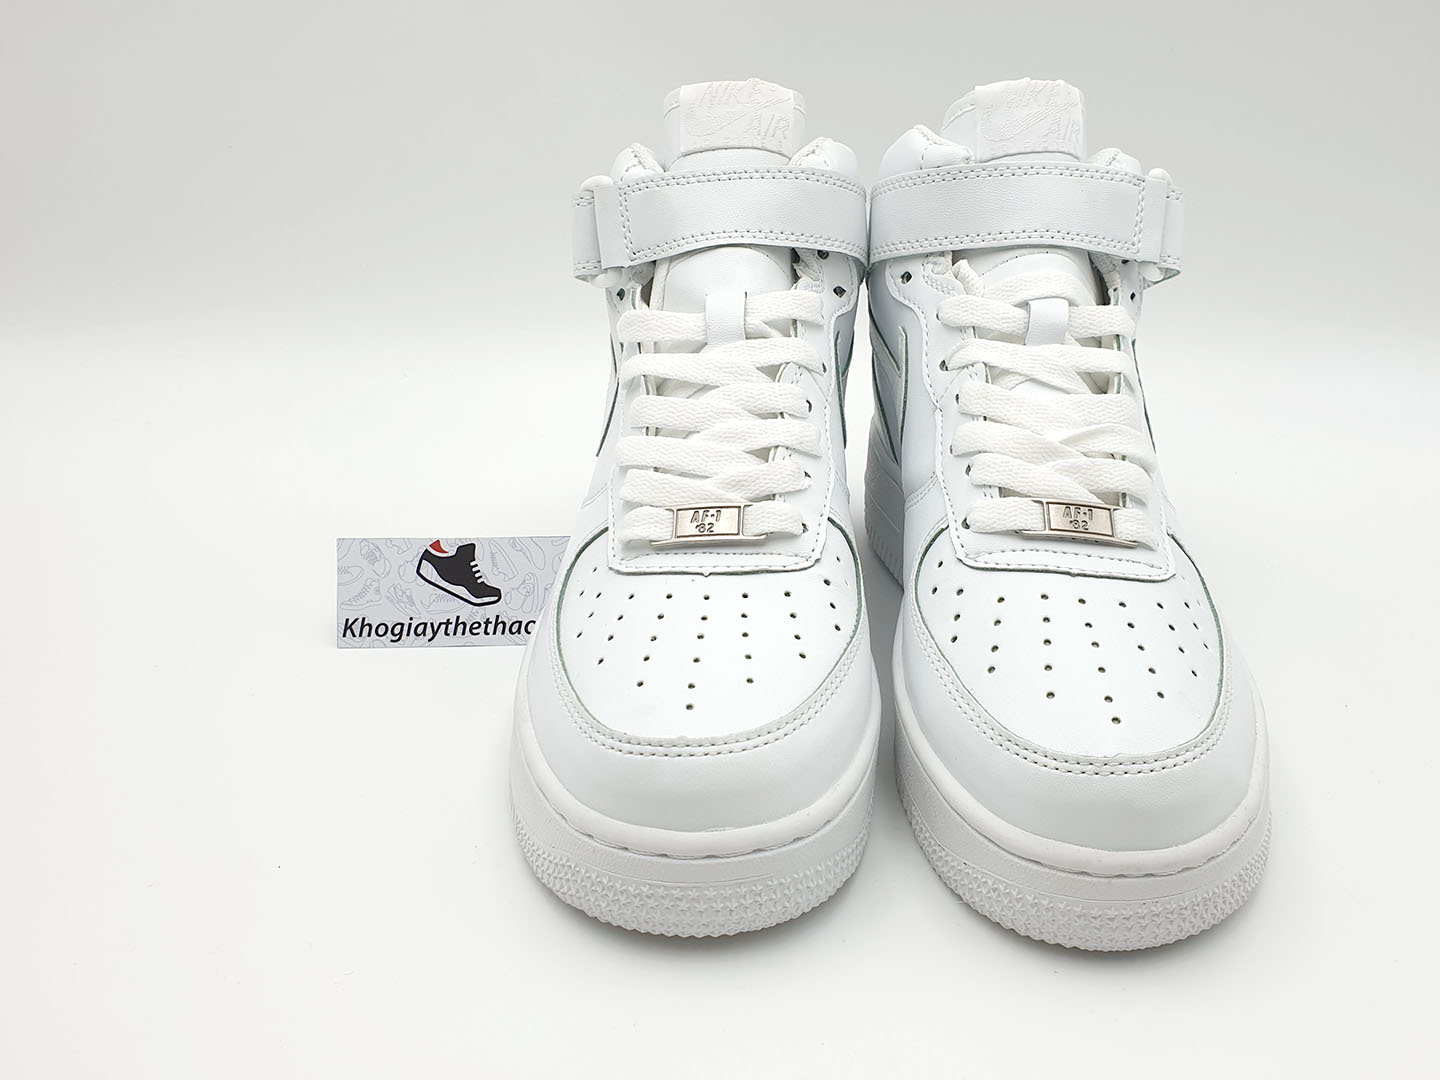 Giày Nike Air Force Cao Cổ Trắng (Af1 Mid) Rep 1:1 - Khogiaythethao